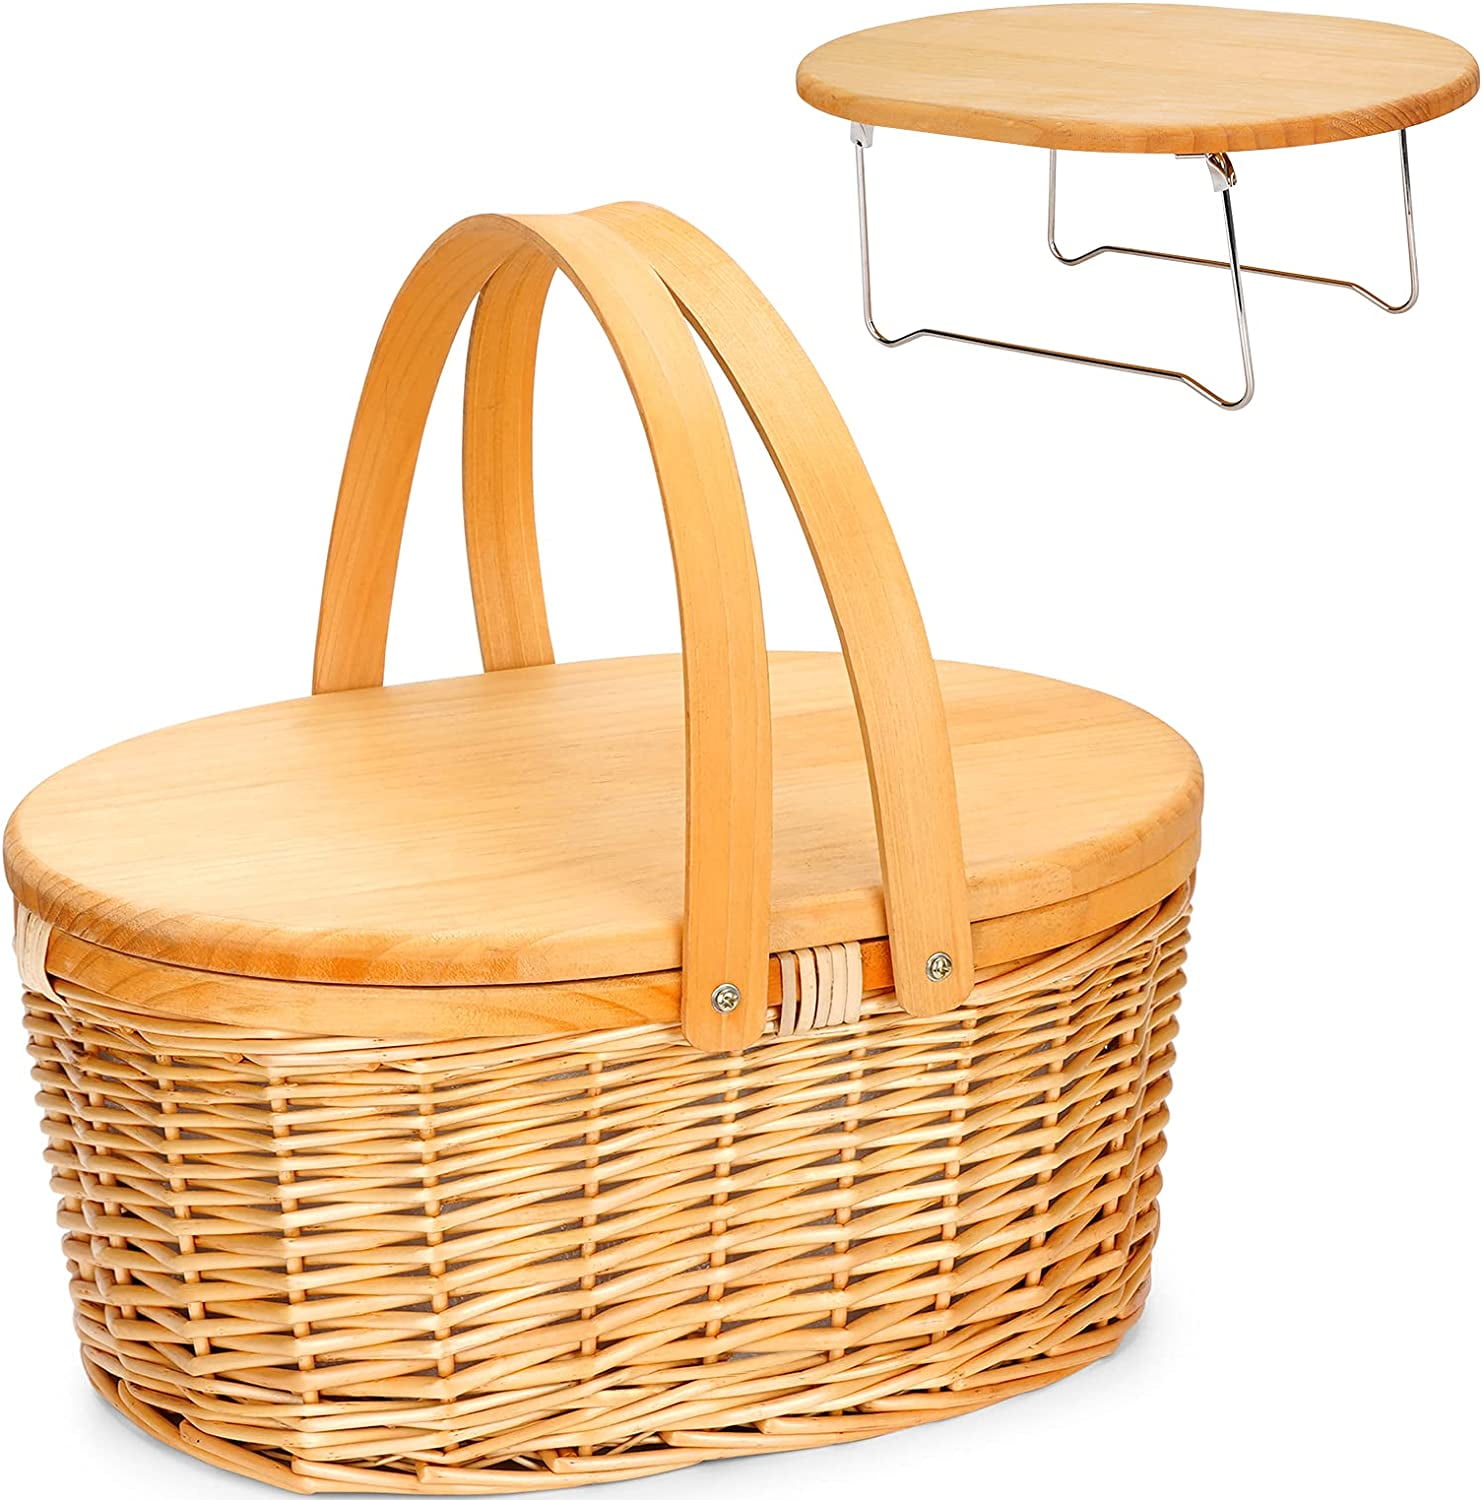 Outdoor Party Beach Wine Baskets for Couples Park Large Willow Picnic Basket Cooler for Gift Camping Wicker Picnic Basket with Insulated Cooler Compartment & Double Swing Handles BBQ.Red 